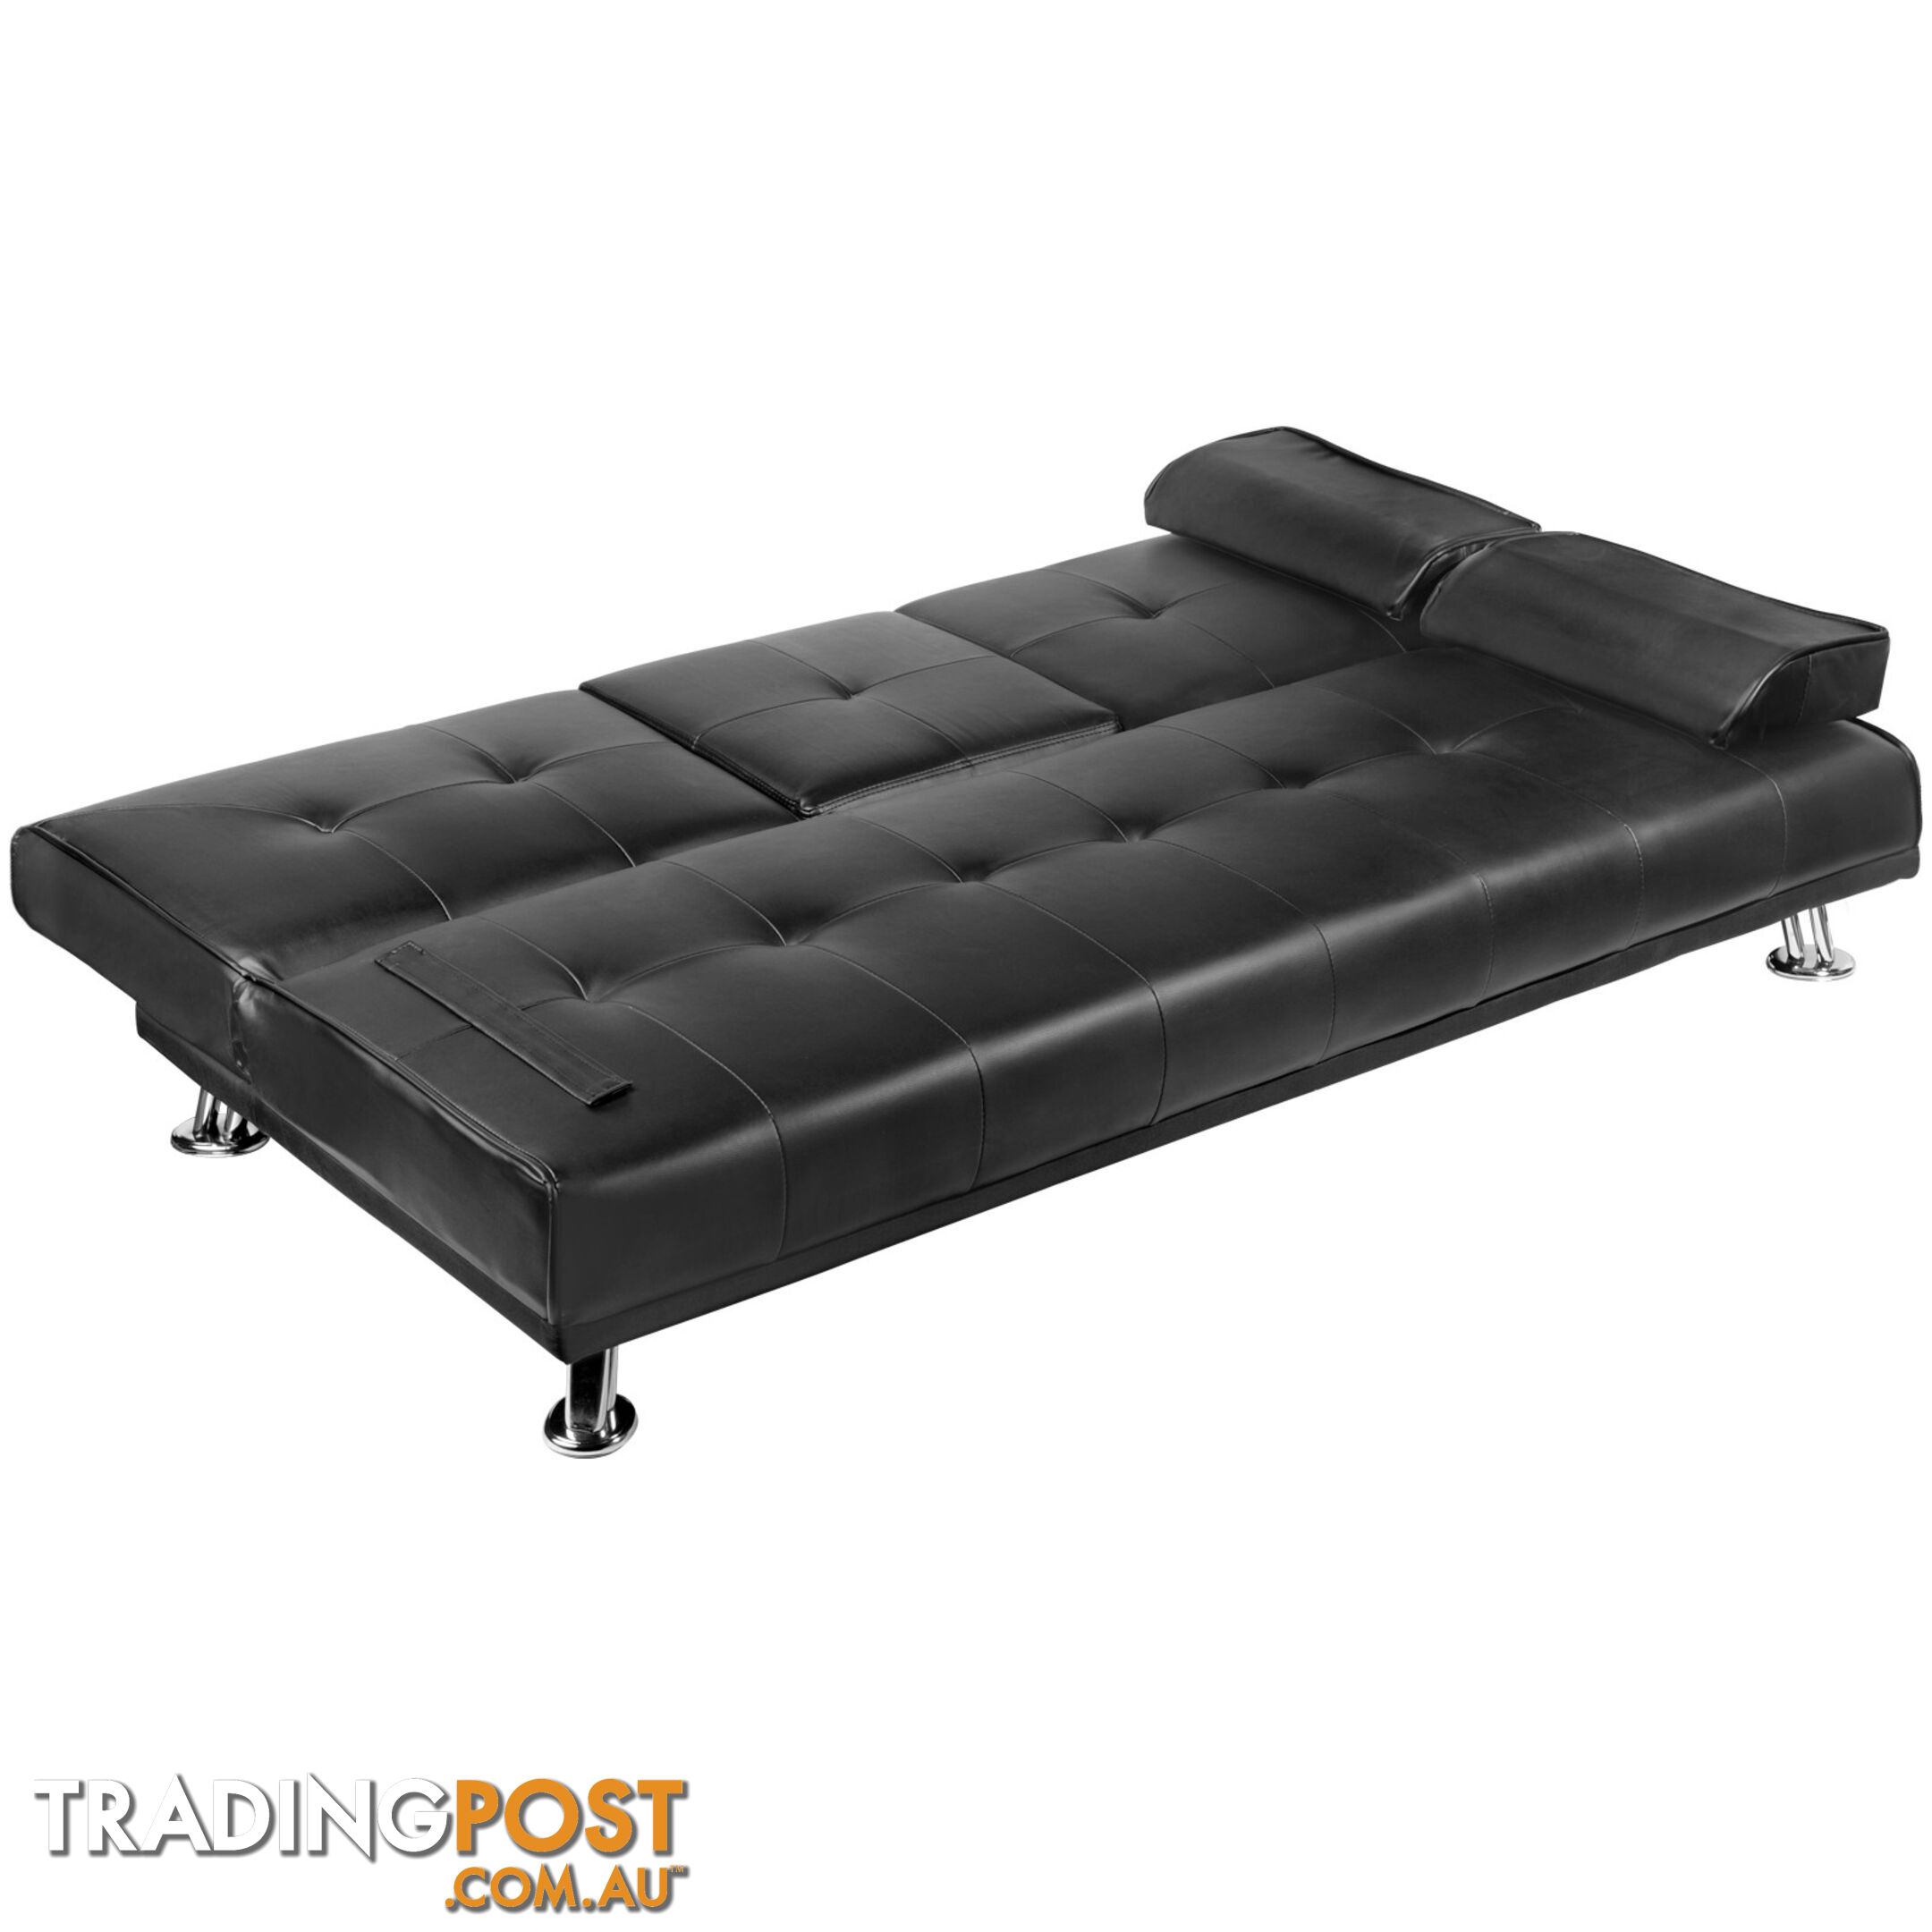 Modern PU leather 3 Seater Sofa Bed w/ Cup Holders